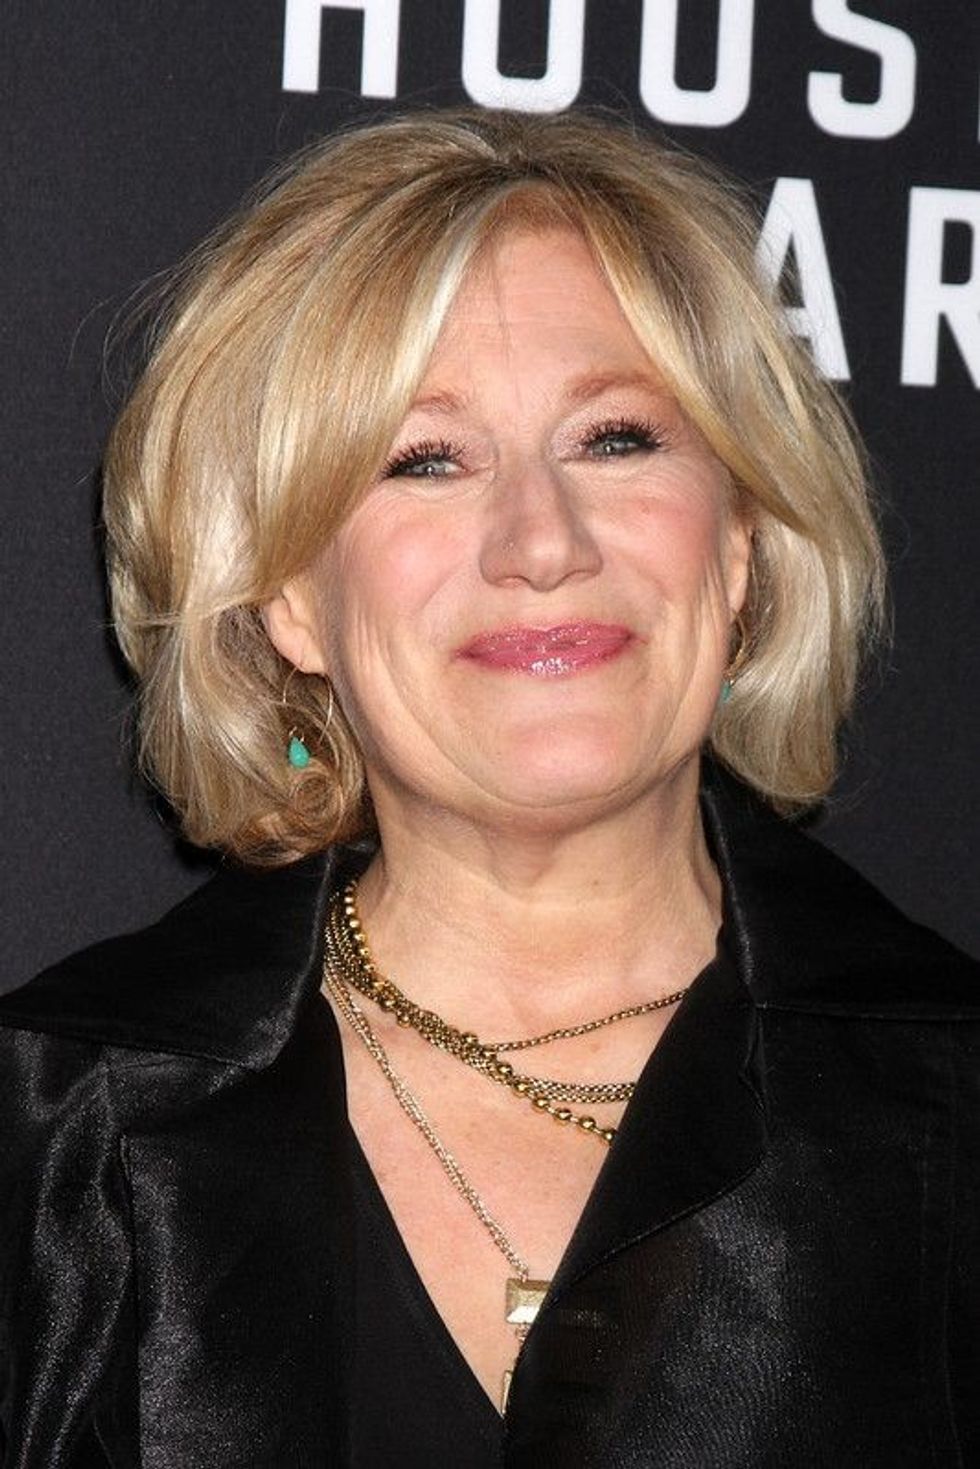 Many people throughout the world are Jayne Atkinson fans because of her amazing and diverse talents!